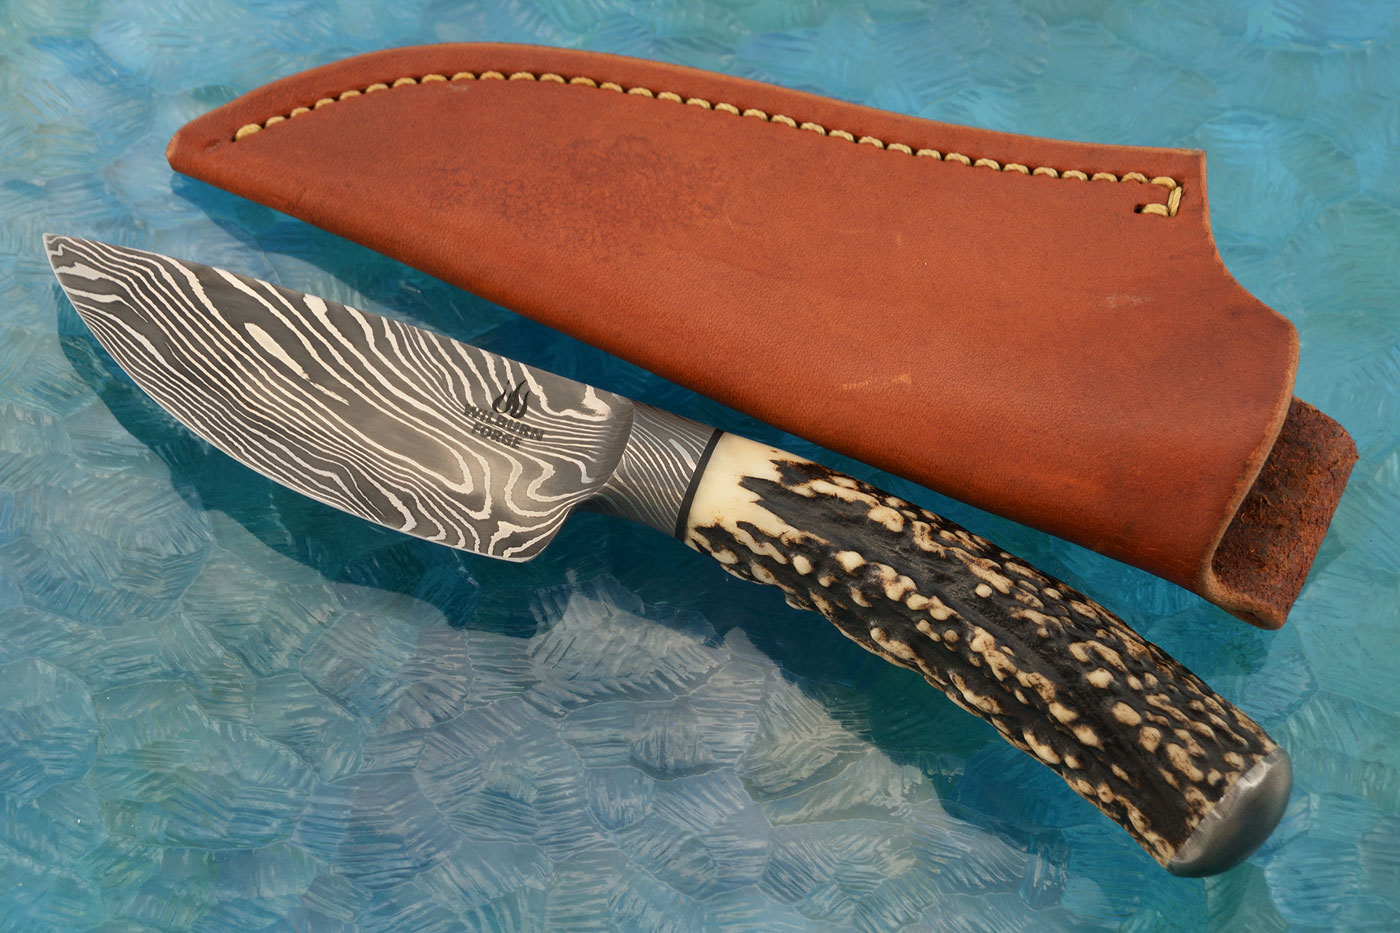 Integral Damascus Hunter with Stag and Wrought Iron